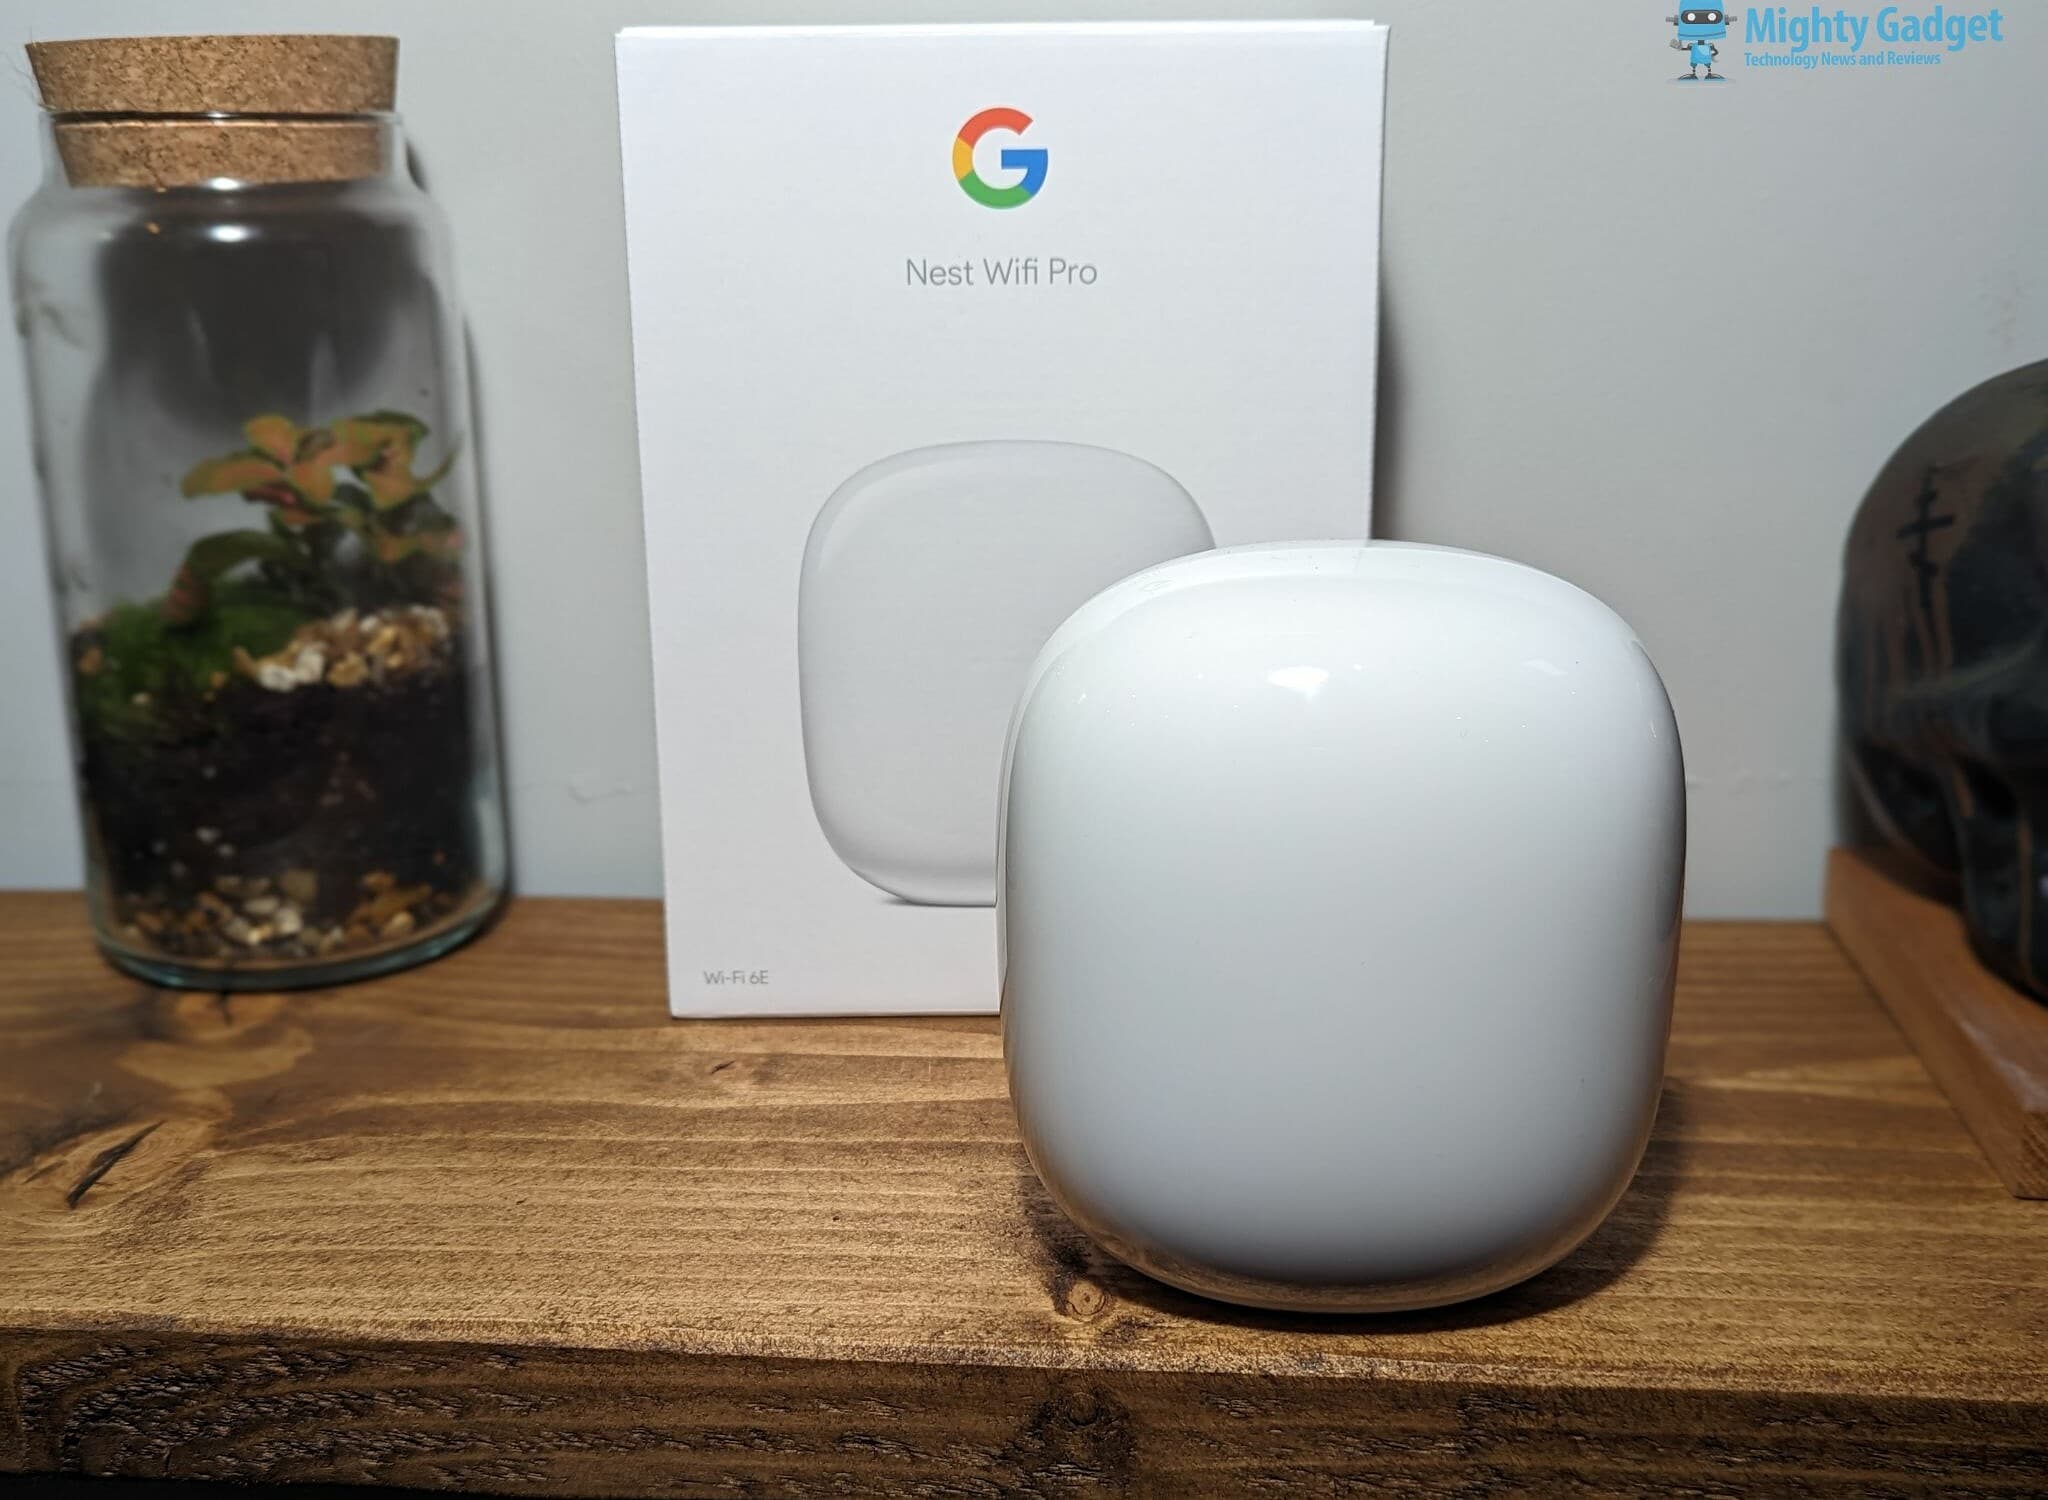 Google Nest WiFi Pro Review by Mighty Gadget product shot2